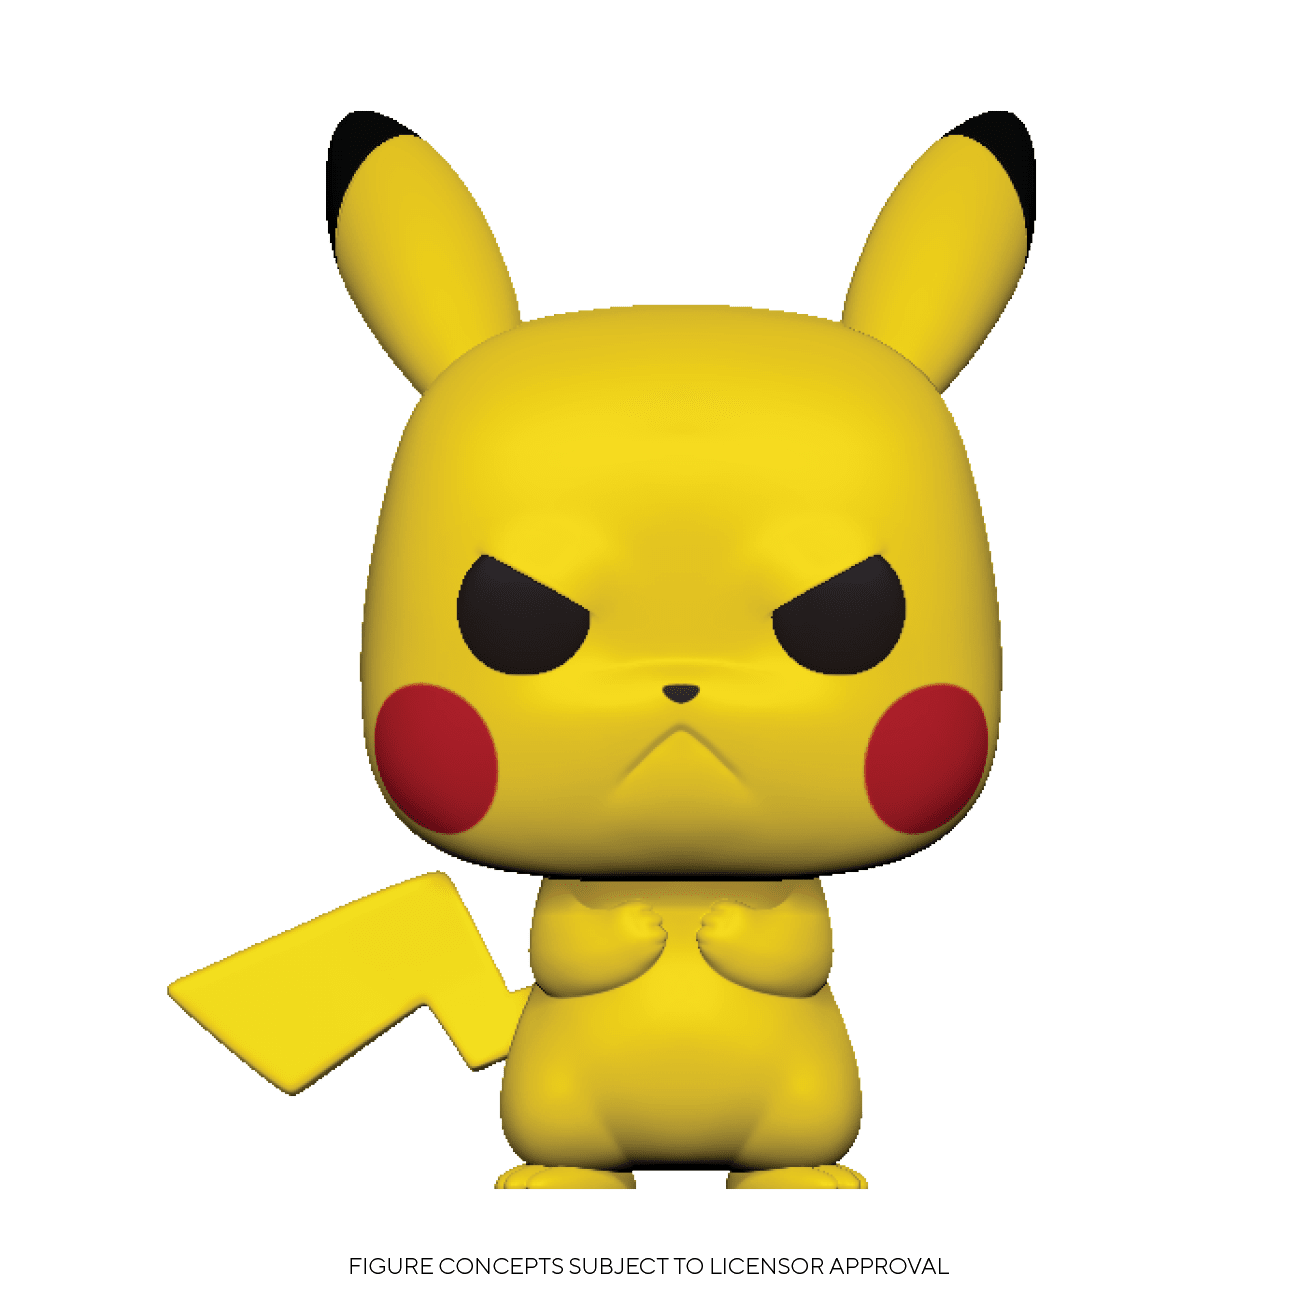 https://www-thepopcentral-com.exactdn.com/wp-content/uploads/2020/09/pokemon-grumby-pikachu-funko-pop-central-shop.png?strip=all&lossy=1&ssl=1